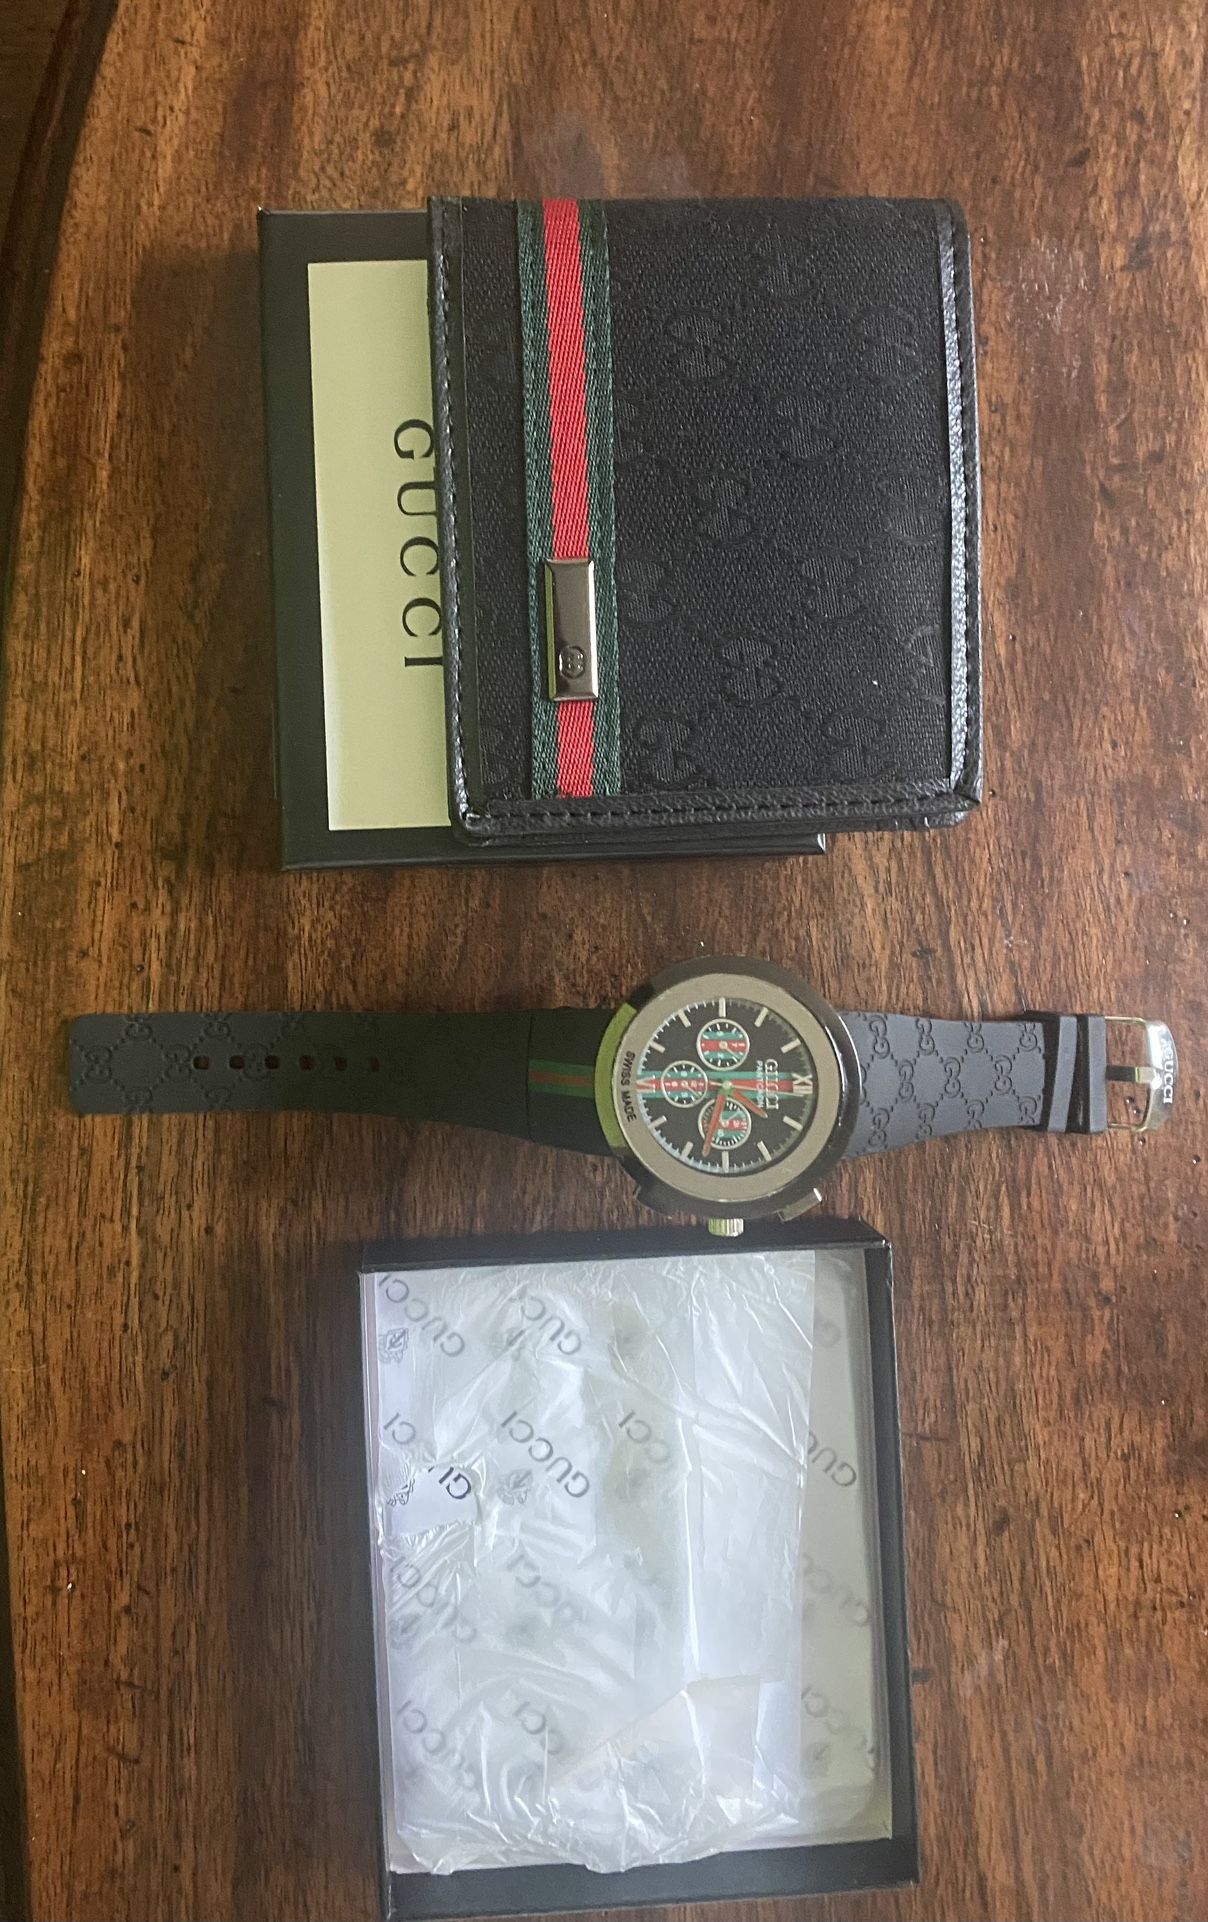 Gucci wallet and watch